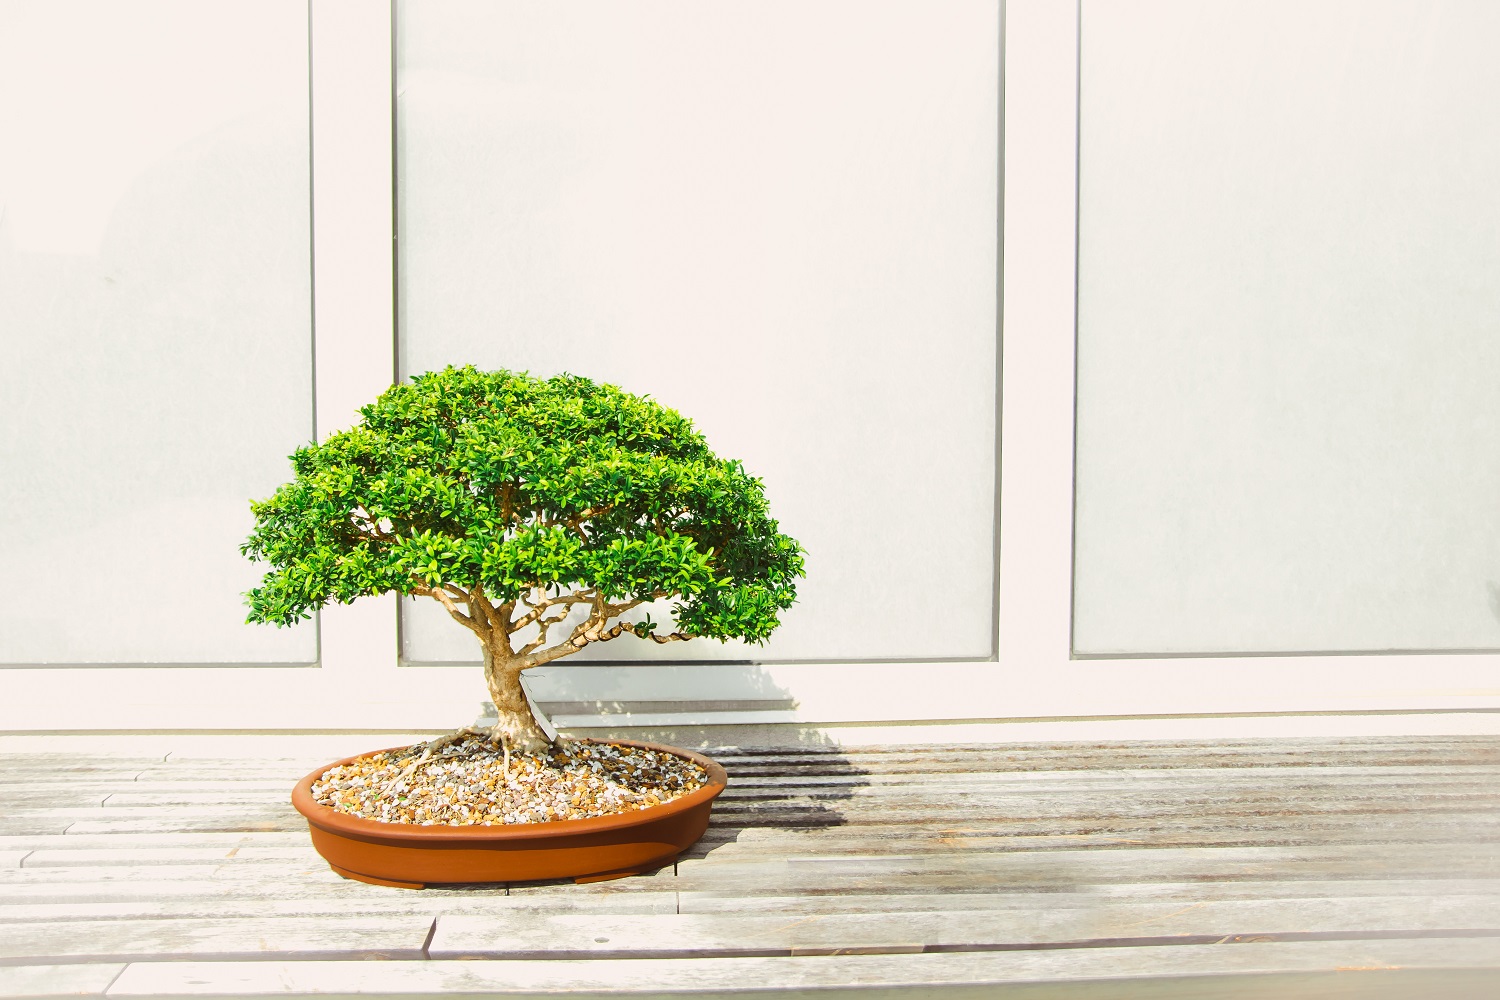 Learn the Art of Bonsai: Check Out These Free Online Courses 15